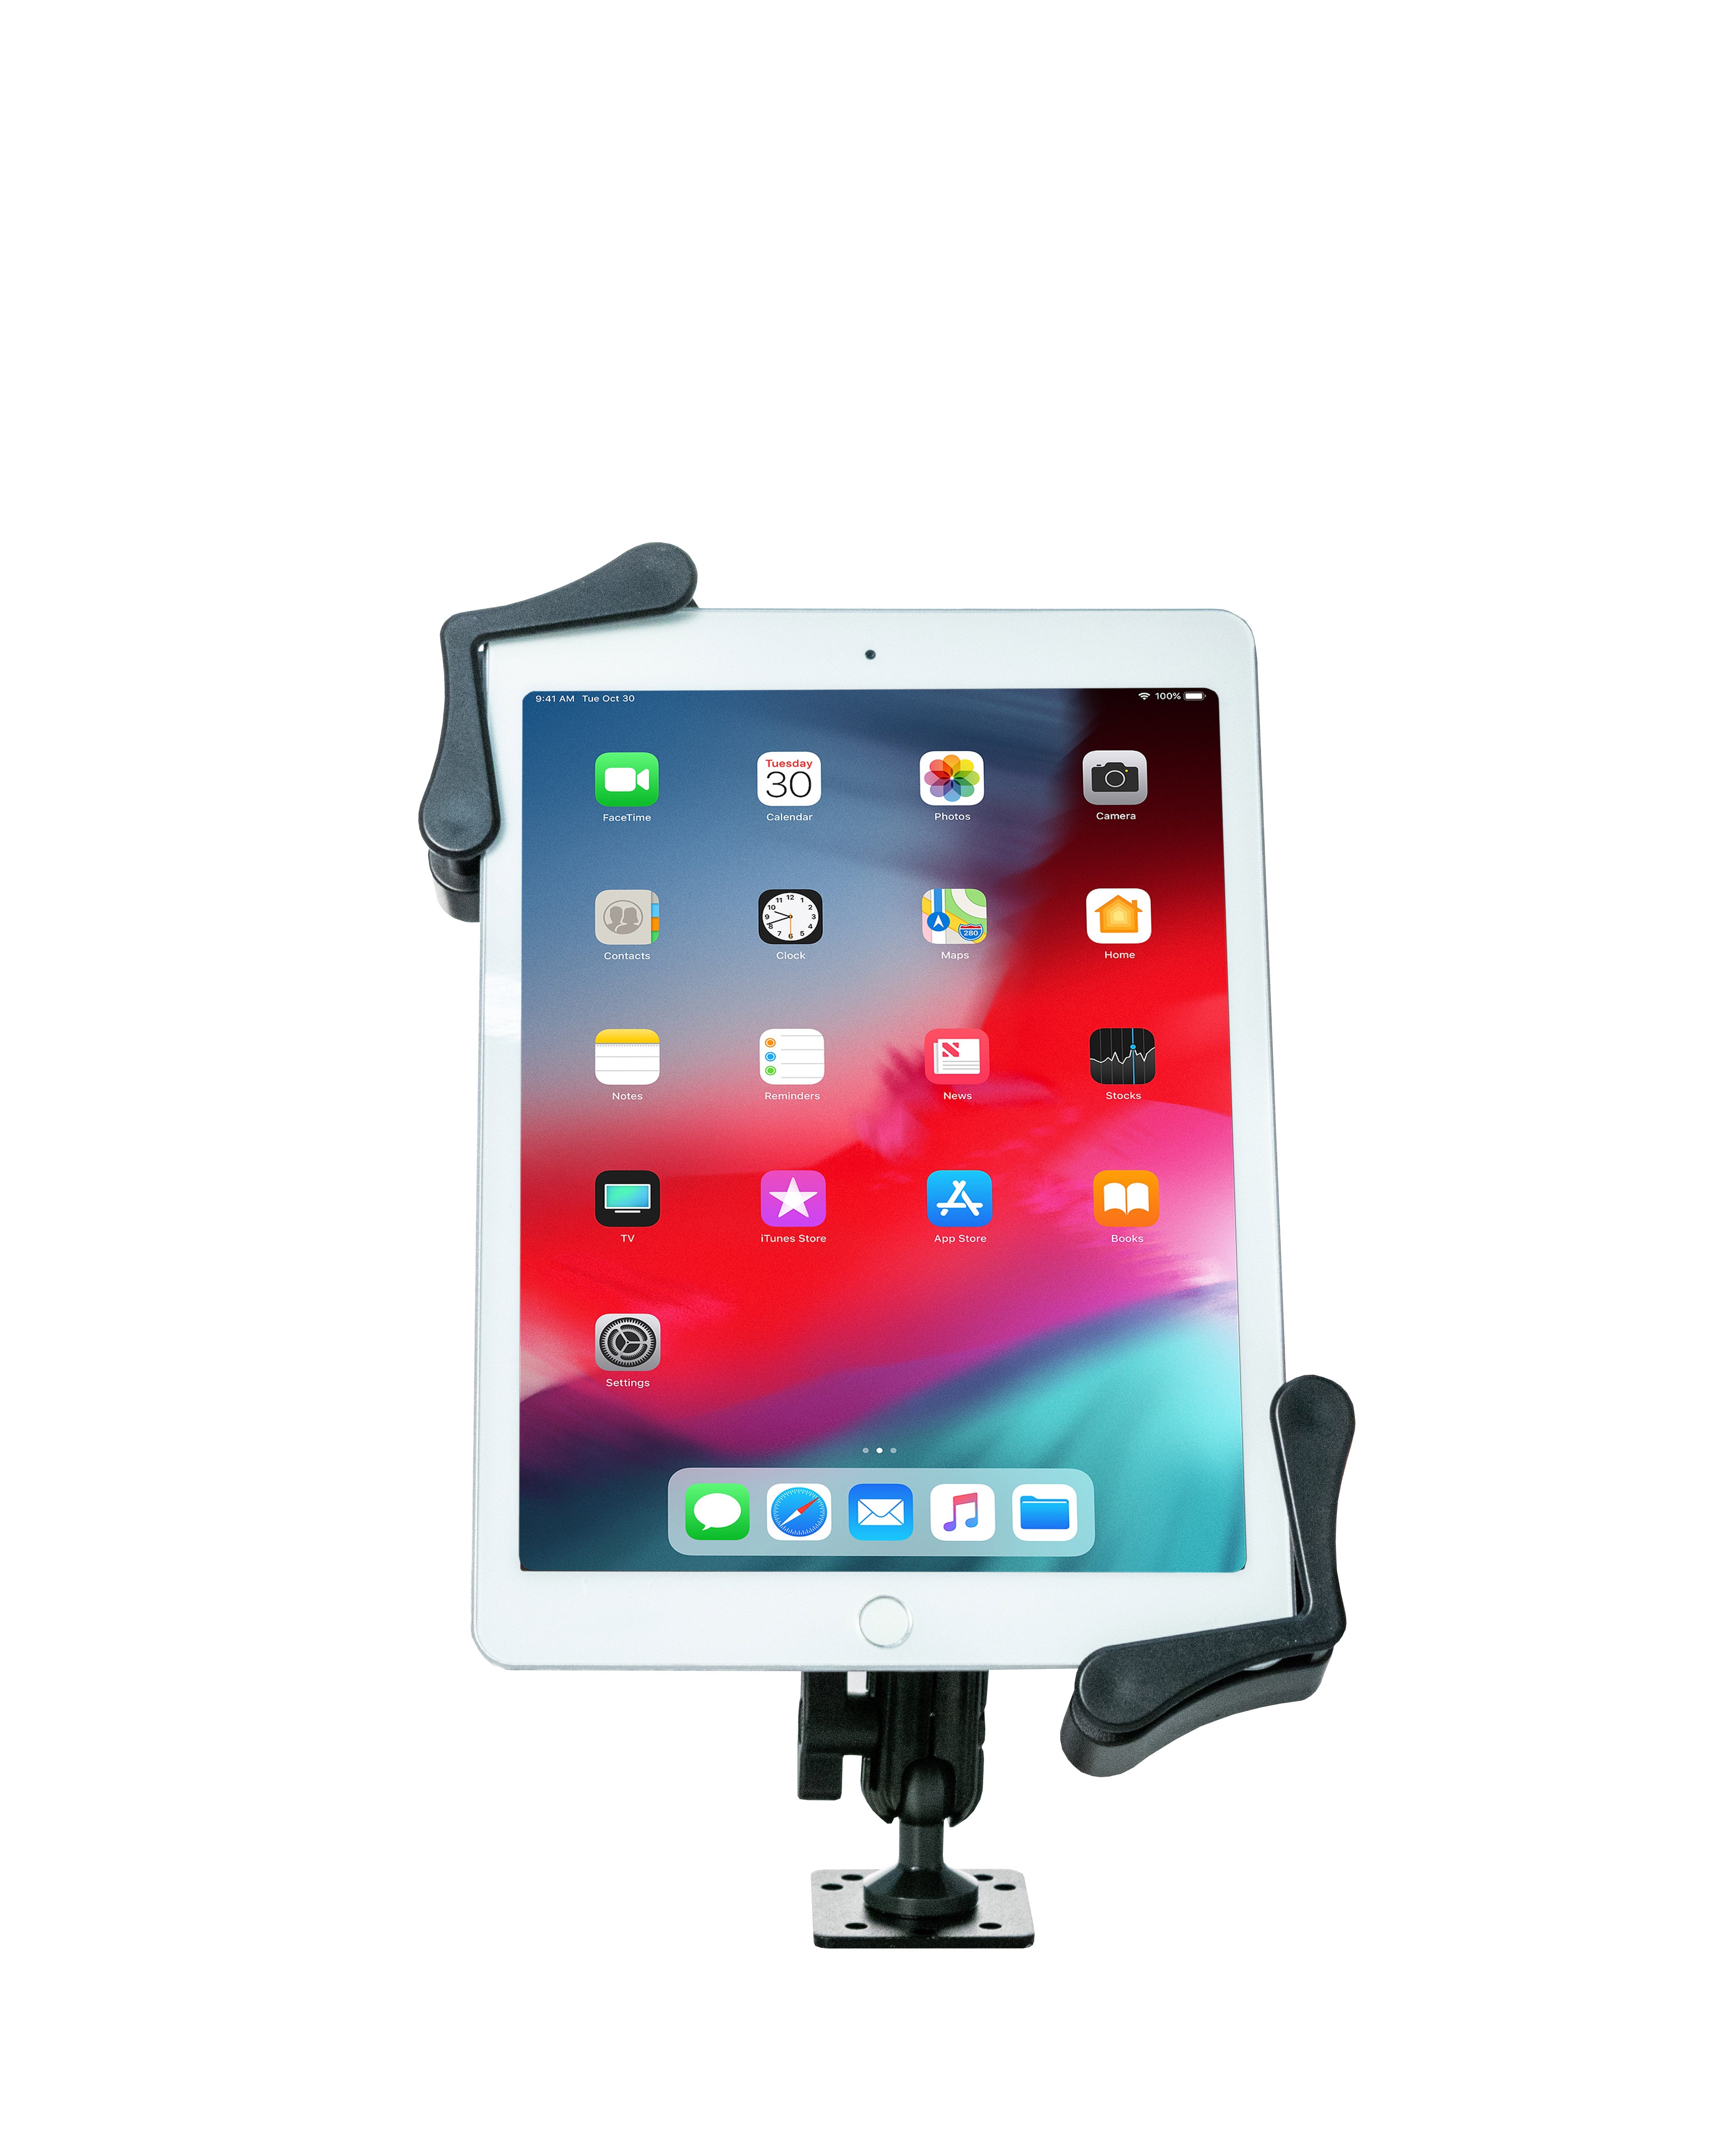 Vehicle Dashboard Mount for 7-14 Inch Tablets, including iPad 10.2-inch (7th/ 8th/ 9th Generation)